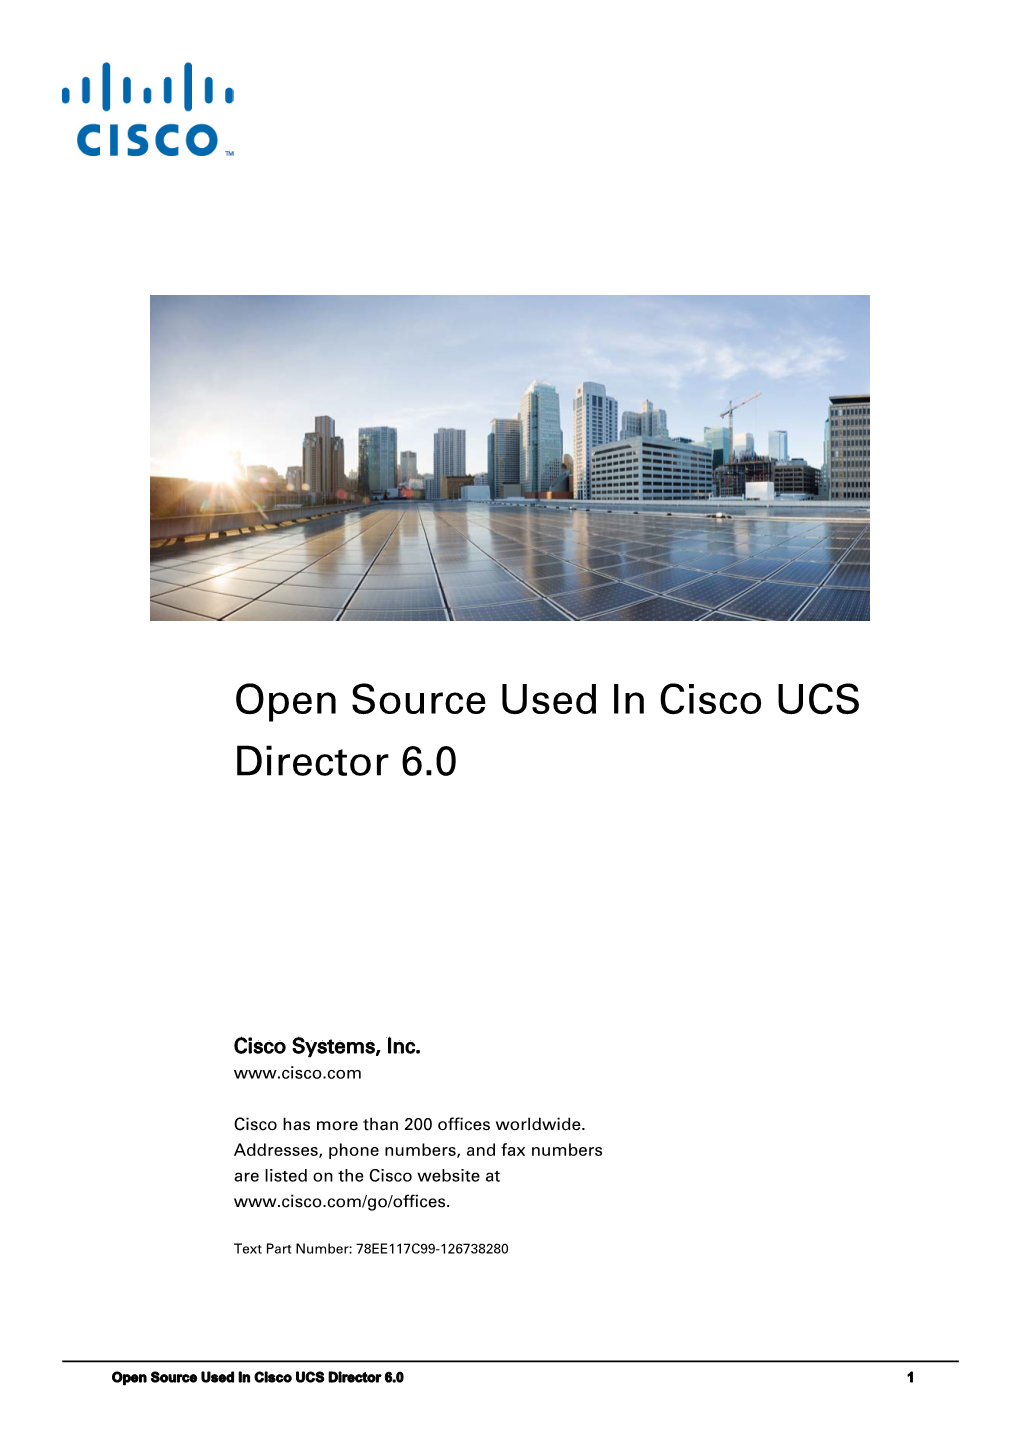 Open Source Used in Cisco UCS Director 6.0